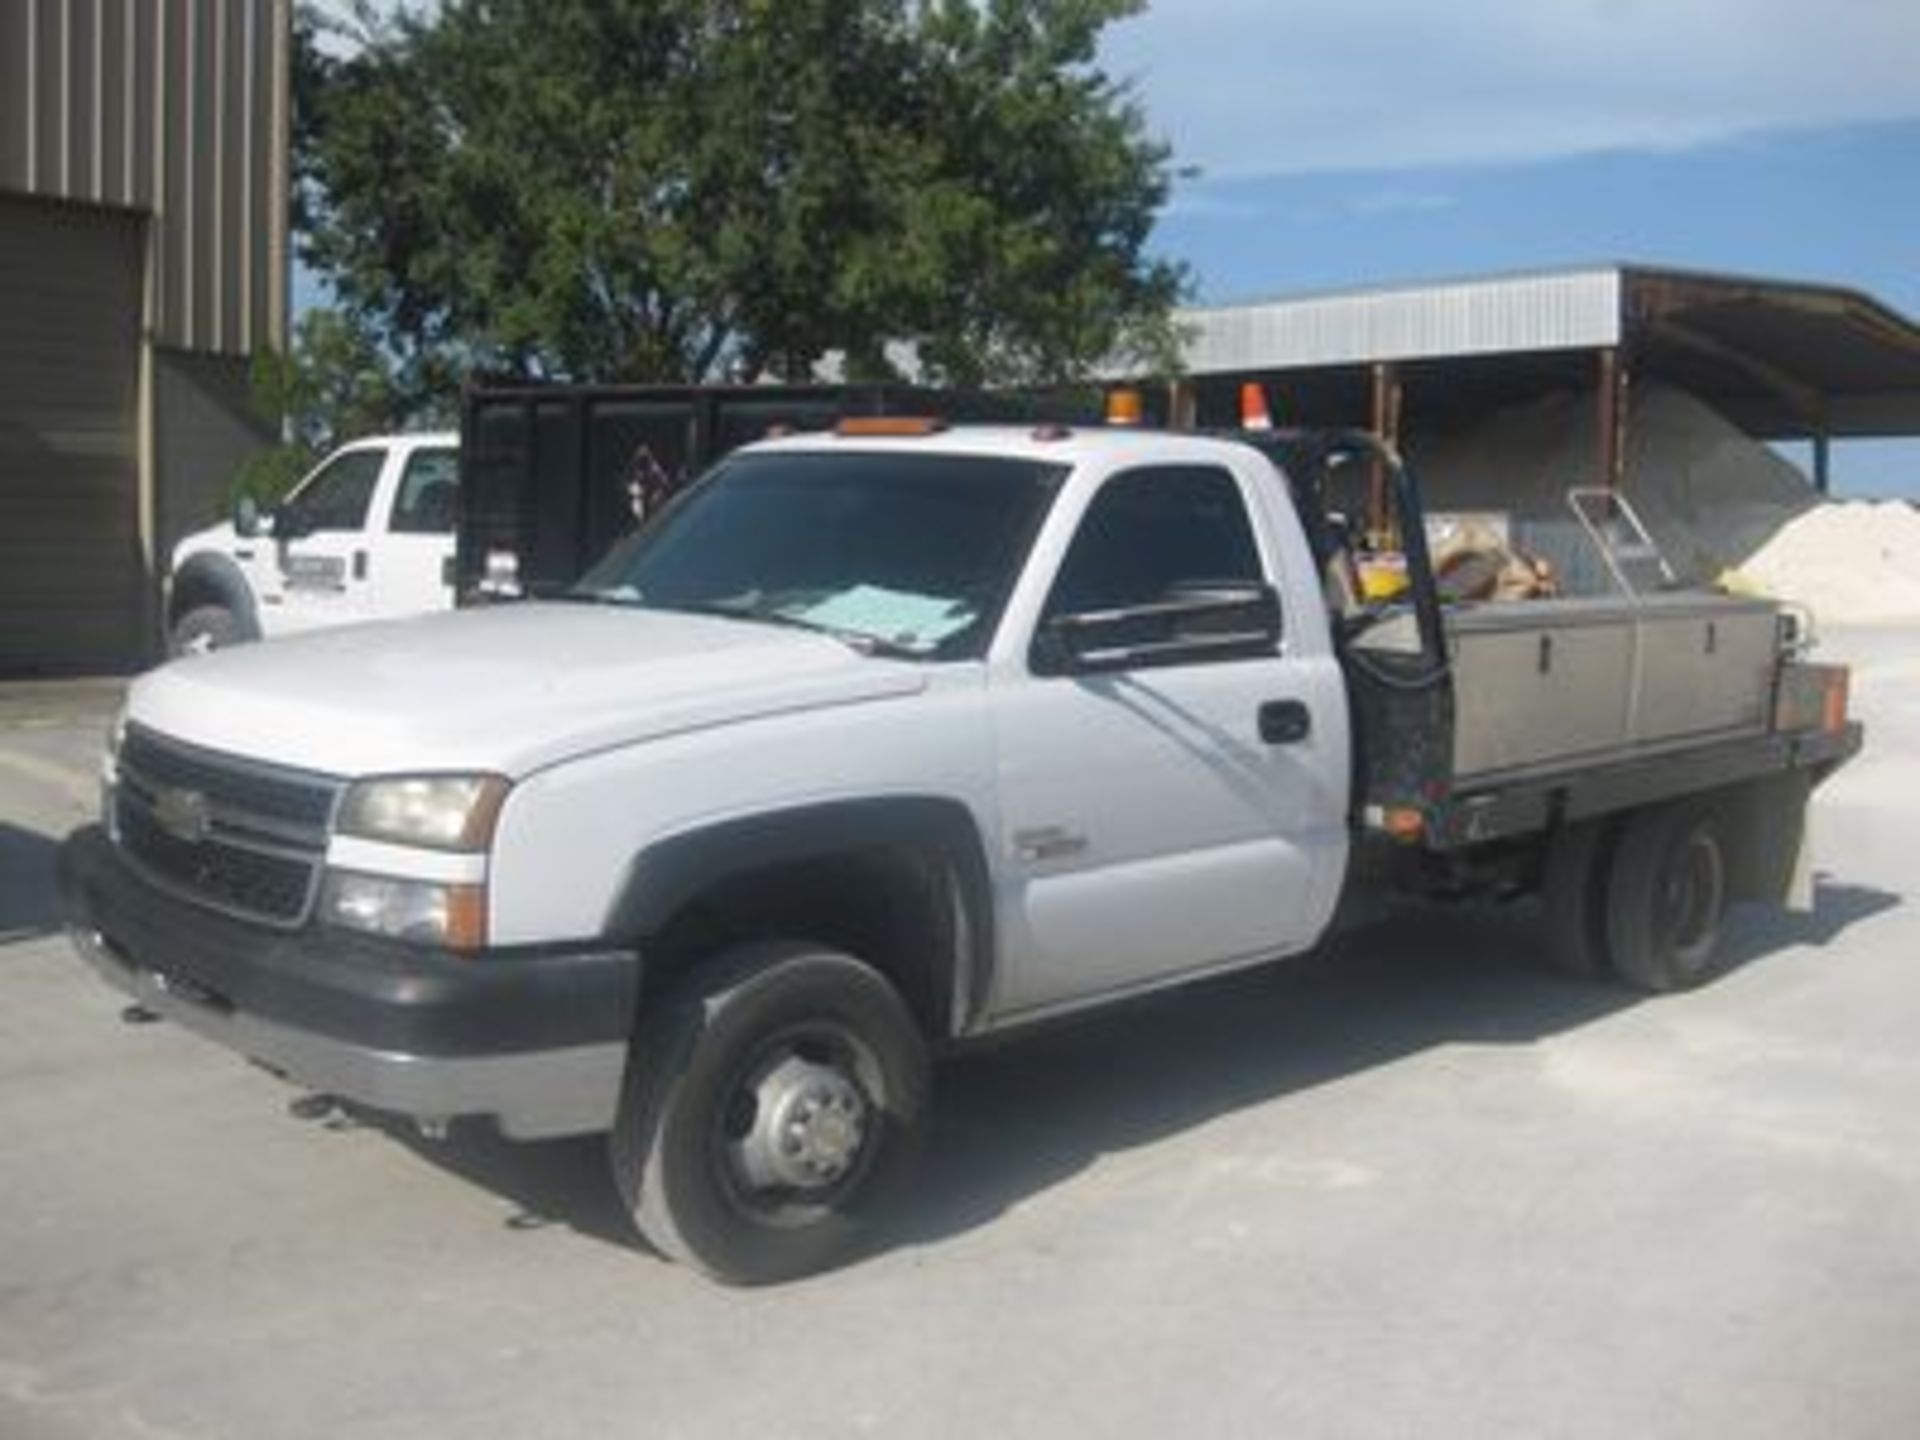 2006 CHEV 3500 DURAMAX DIESEL FLATBED TRUCK, 4X4, 11'X8' BODY, SIDE TOOLBOXES, AT, AC, AM/FM, INT.